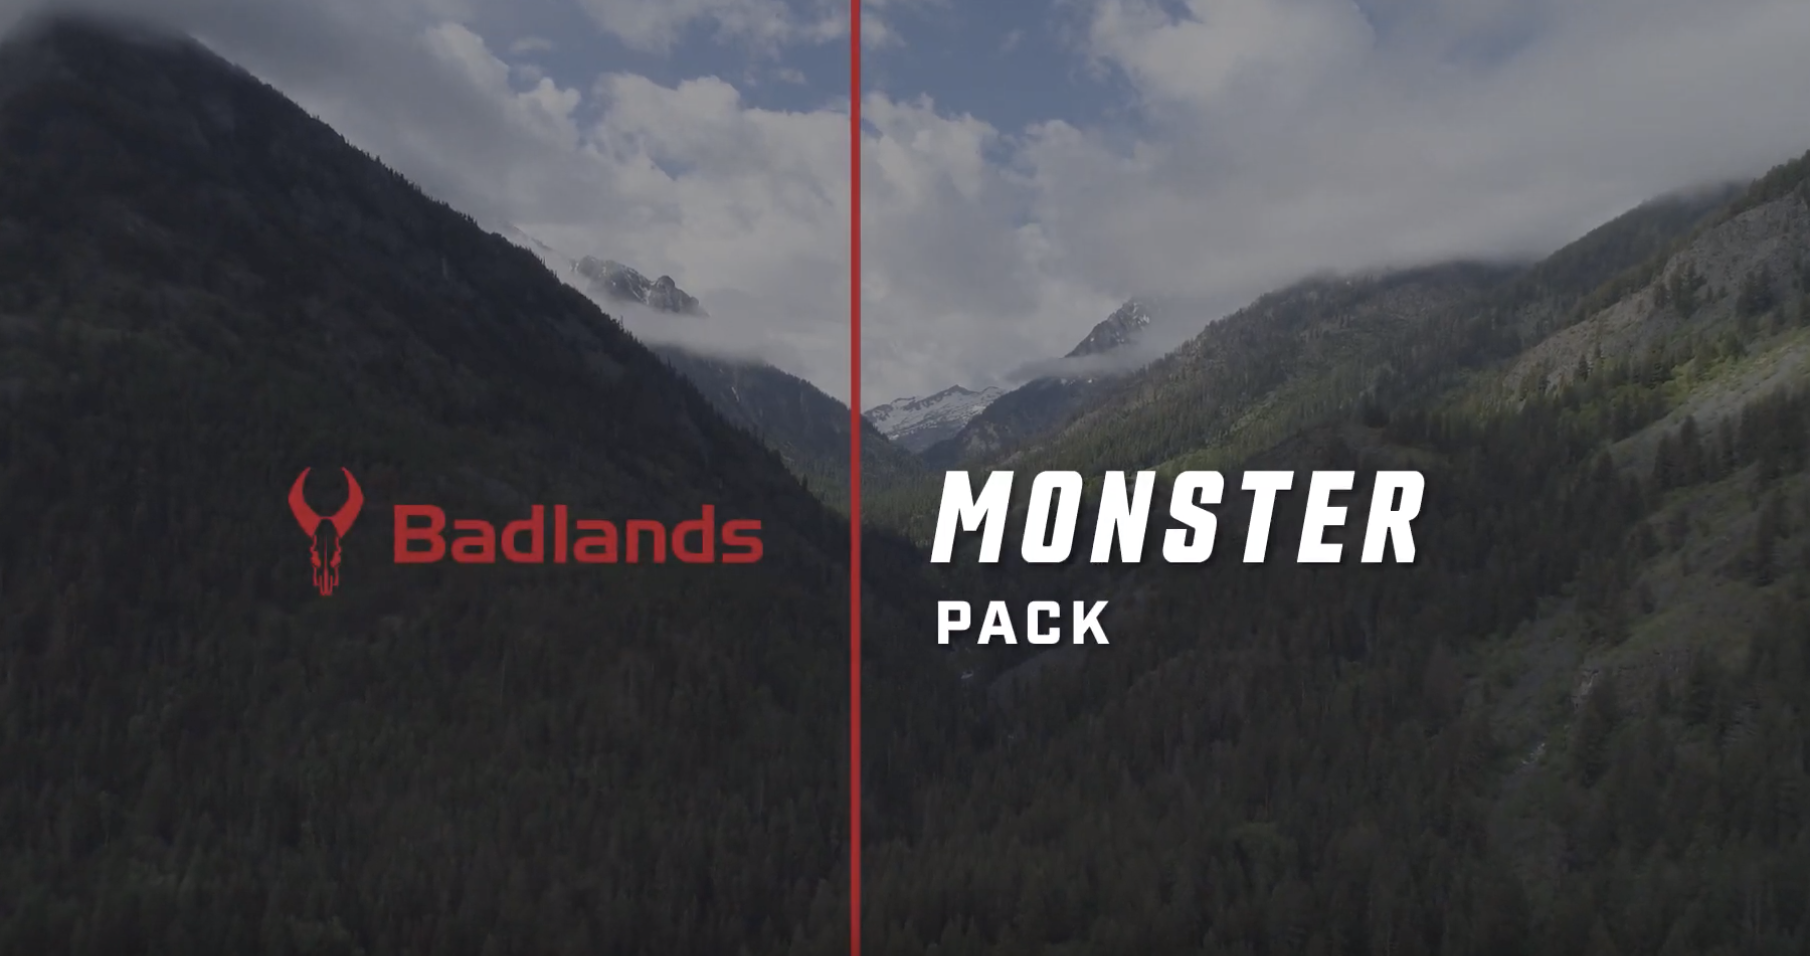 Learn more about the Monster Pack